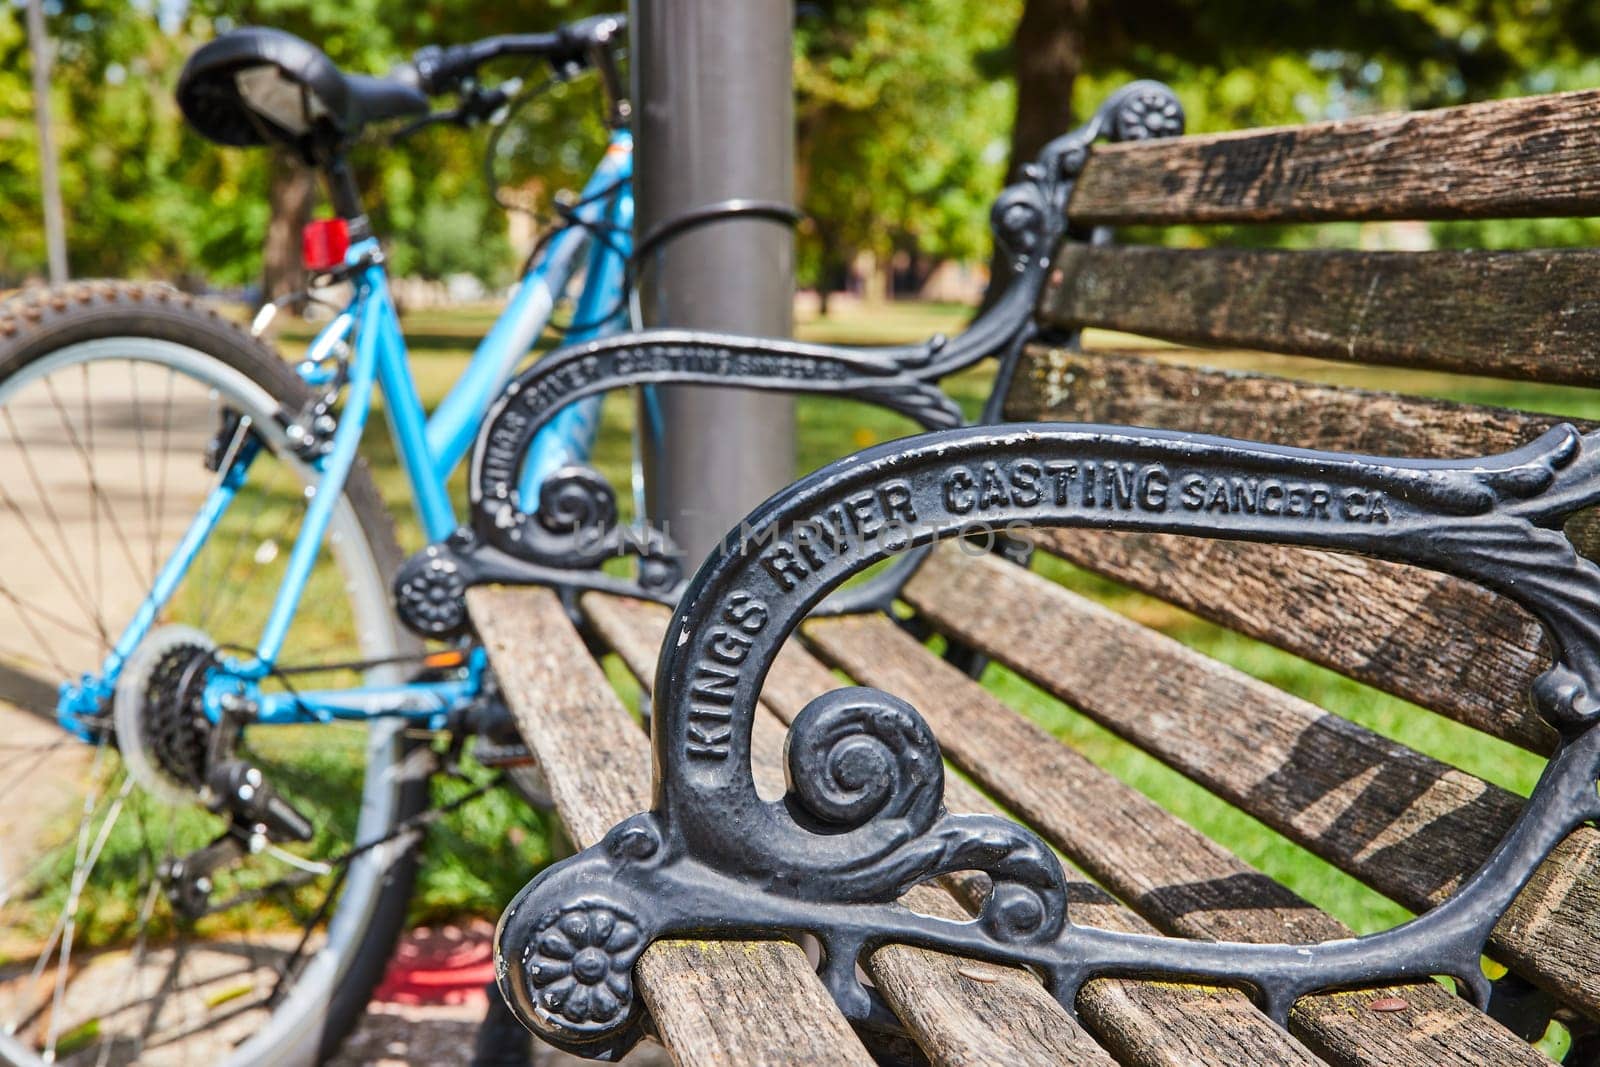 Ornate Park Bench and Bicycle in Urban Green Space Close-Up by njproductions